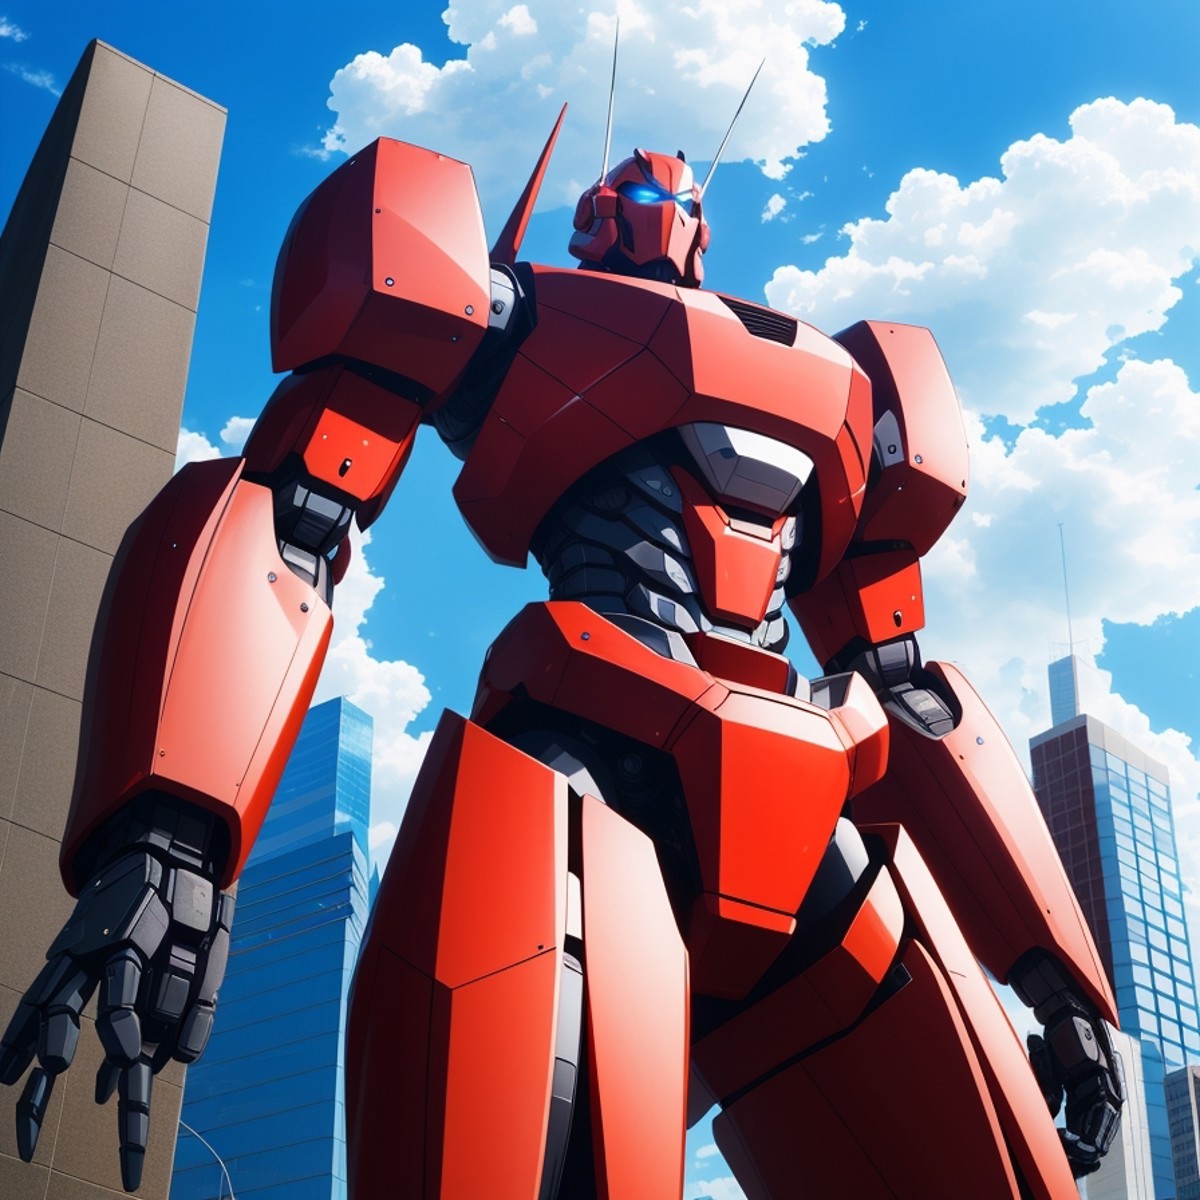 an anime screencap of a giant robot from an anime movie from the 80's, basic anime style